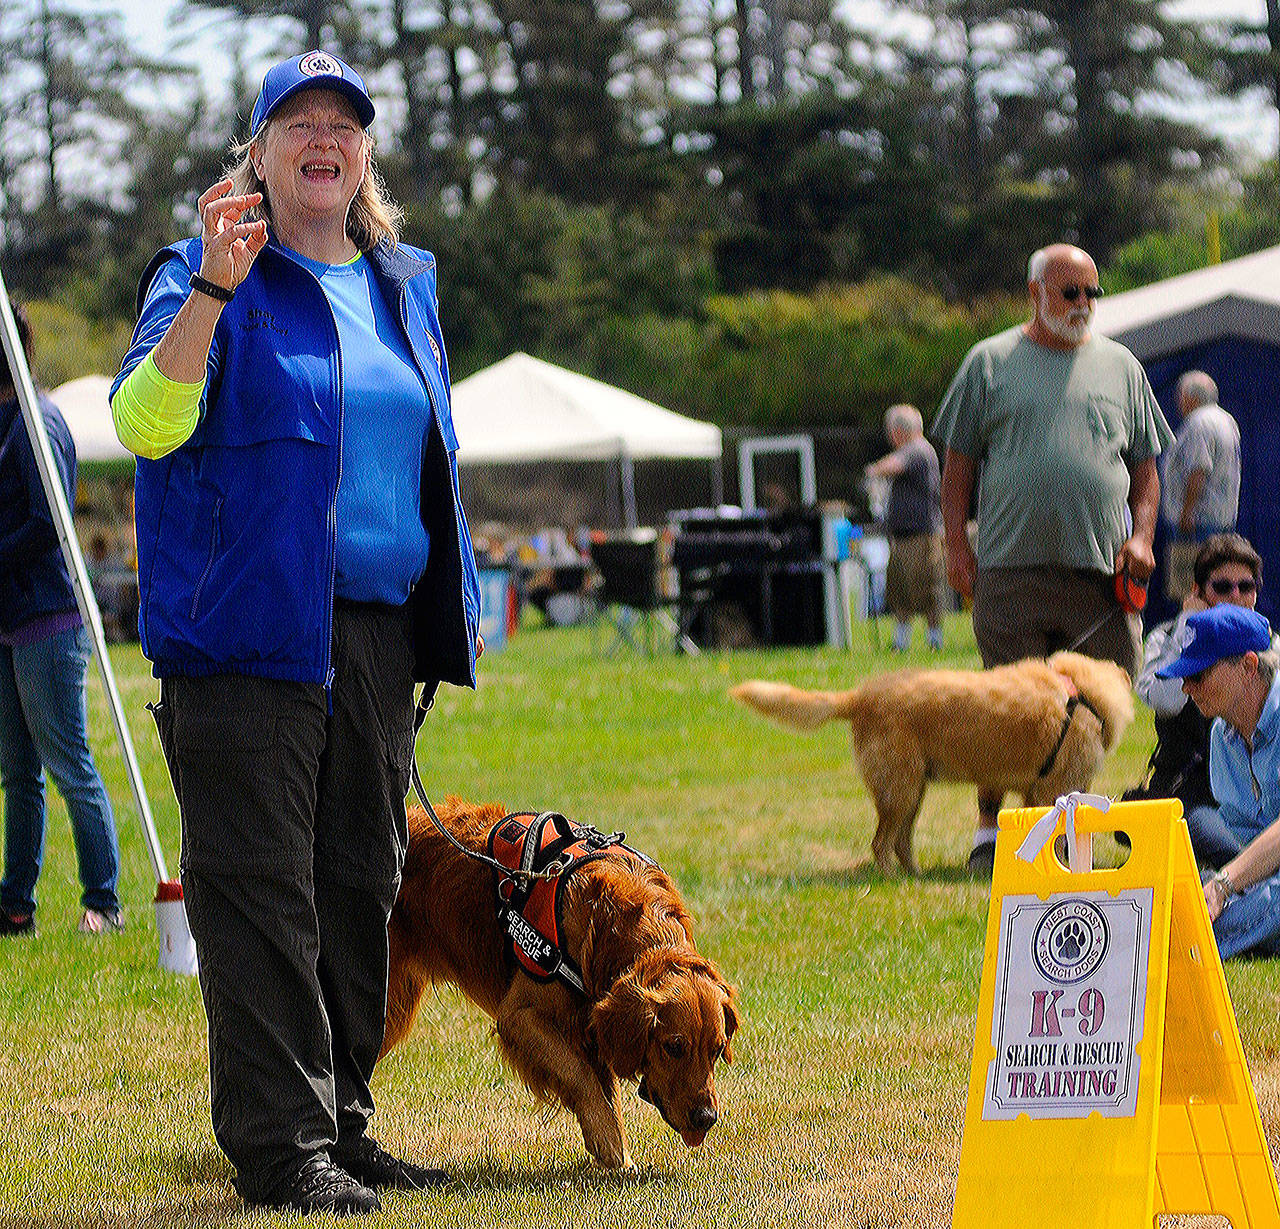 Dog Day Afternoon: Annual Woof-a-Thon in Ocean Shores